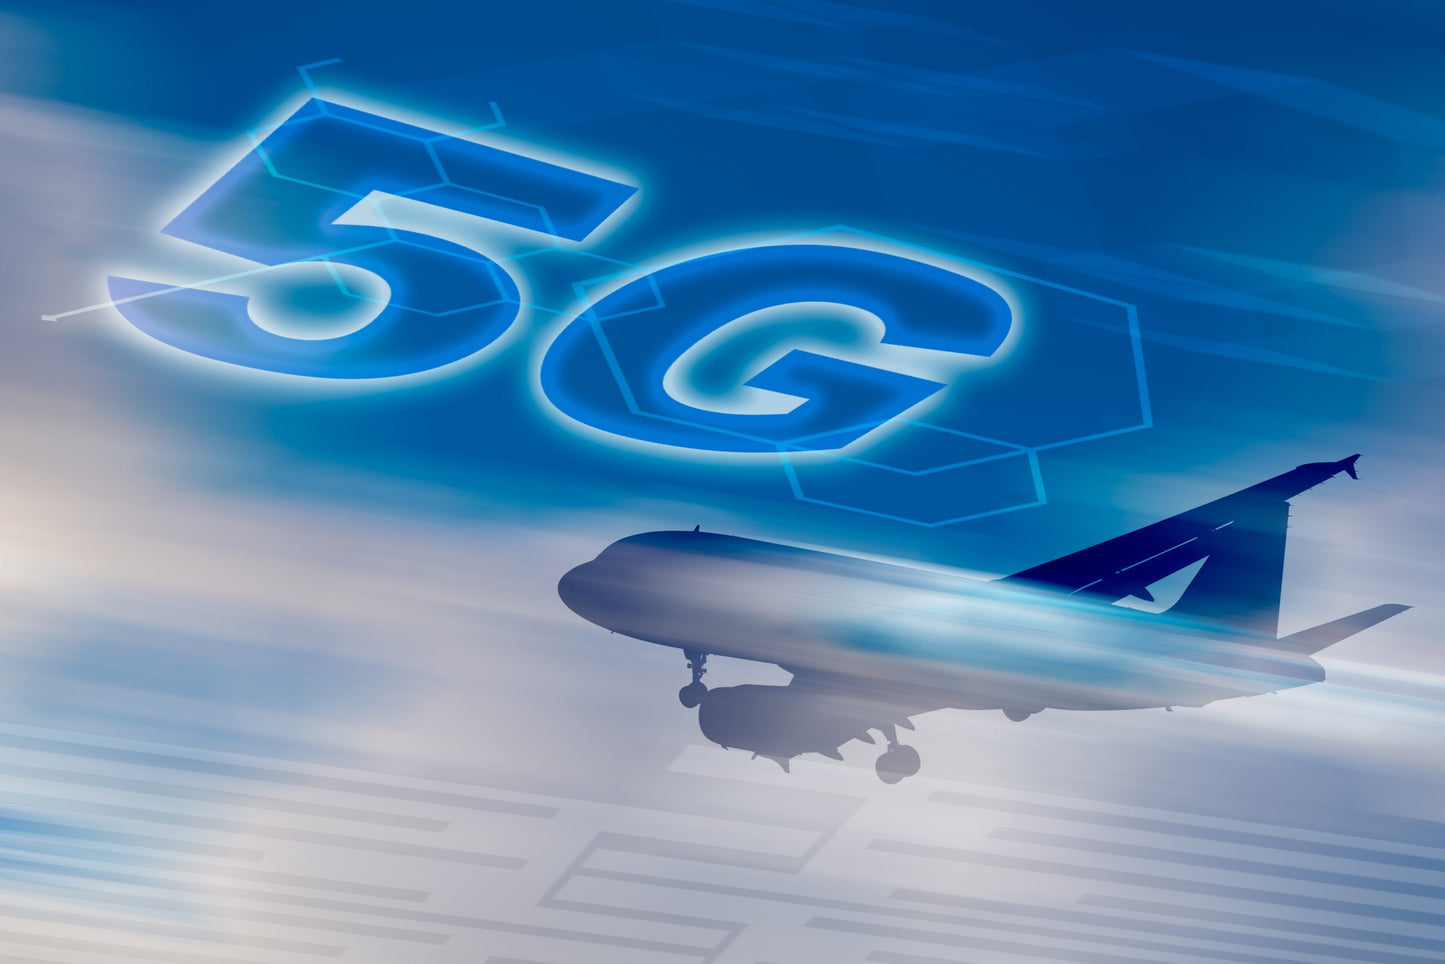 Artistic image of an airplane flying through the sky with a neon "5G" in the sky